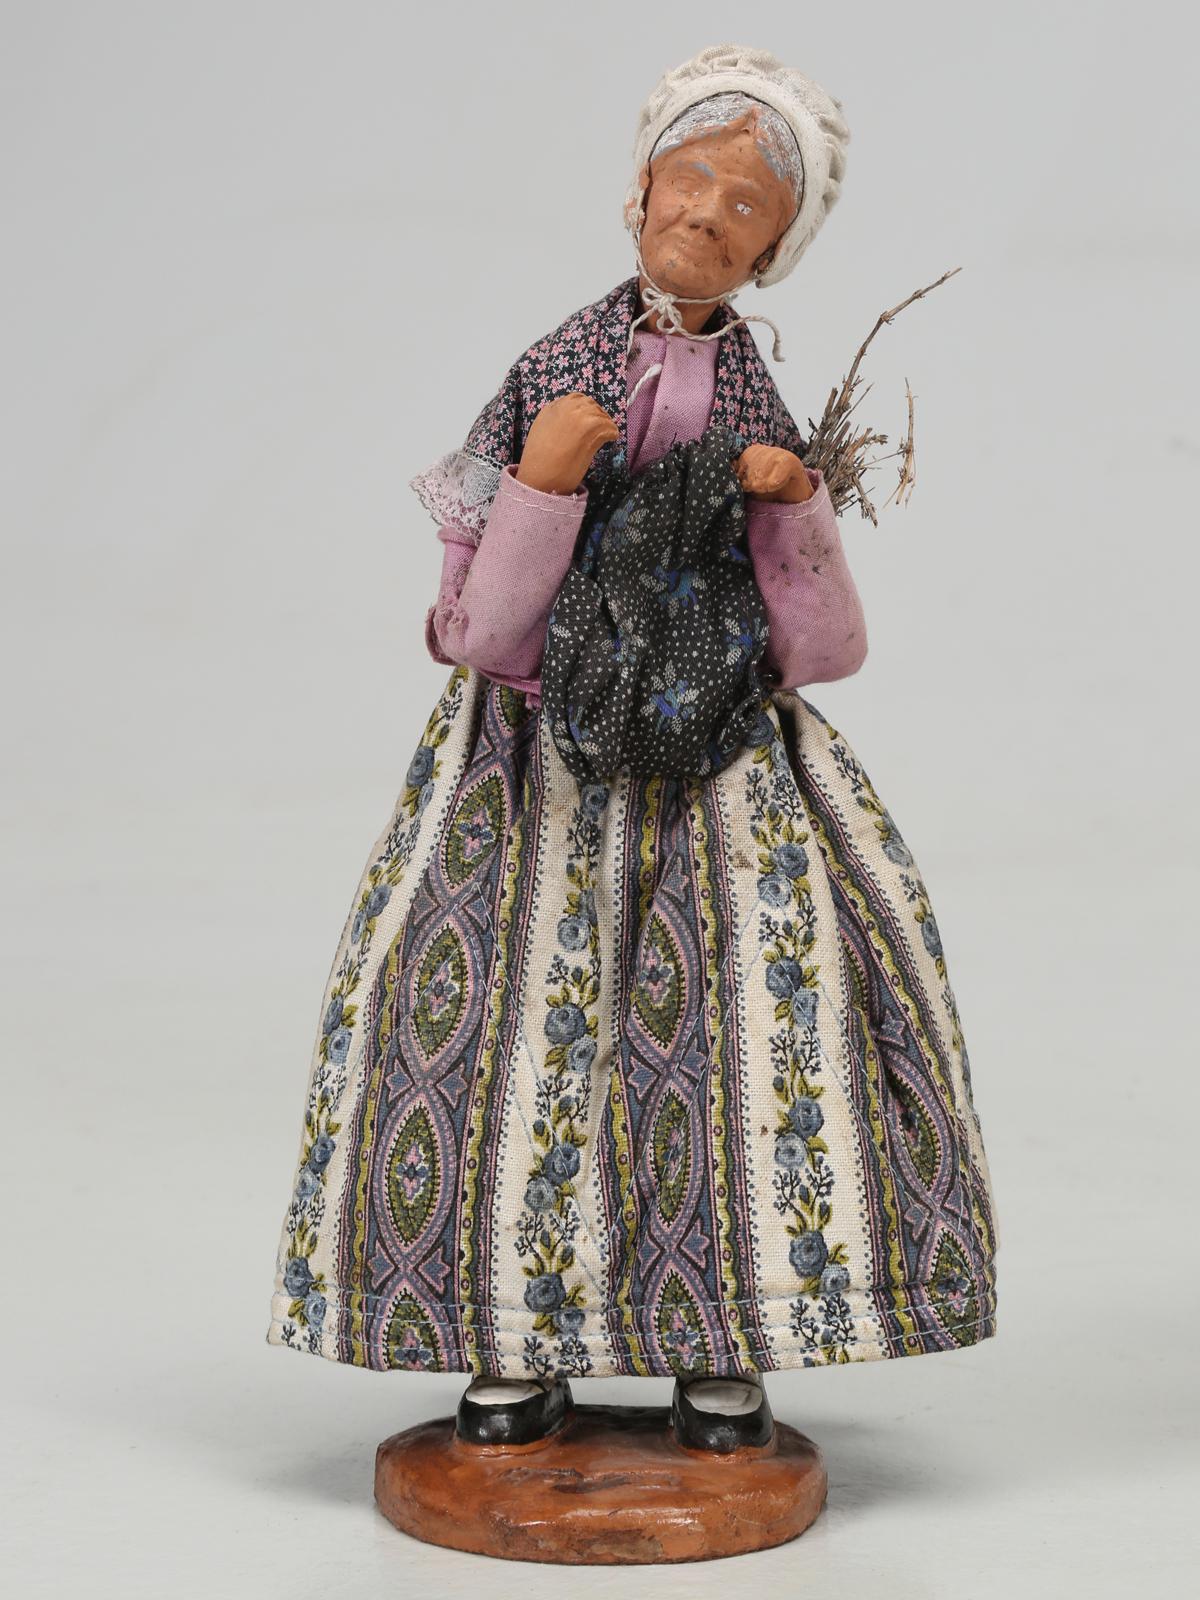 Santons are hand painted, terracotta nativity scene doll like figurines, from southeastern France. There are about 55 different people, from various characters in the typical Provençal village. Santons were first created by the artist Lagnel